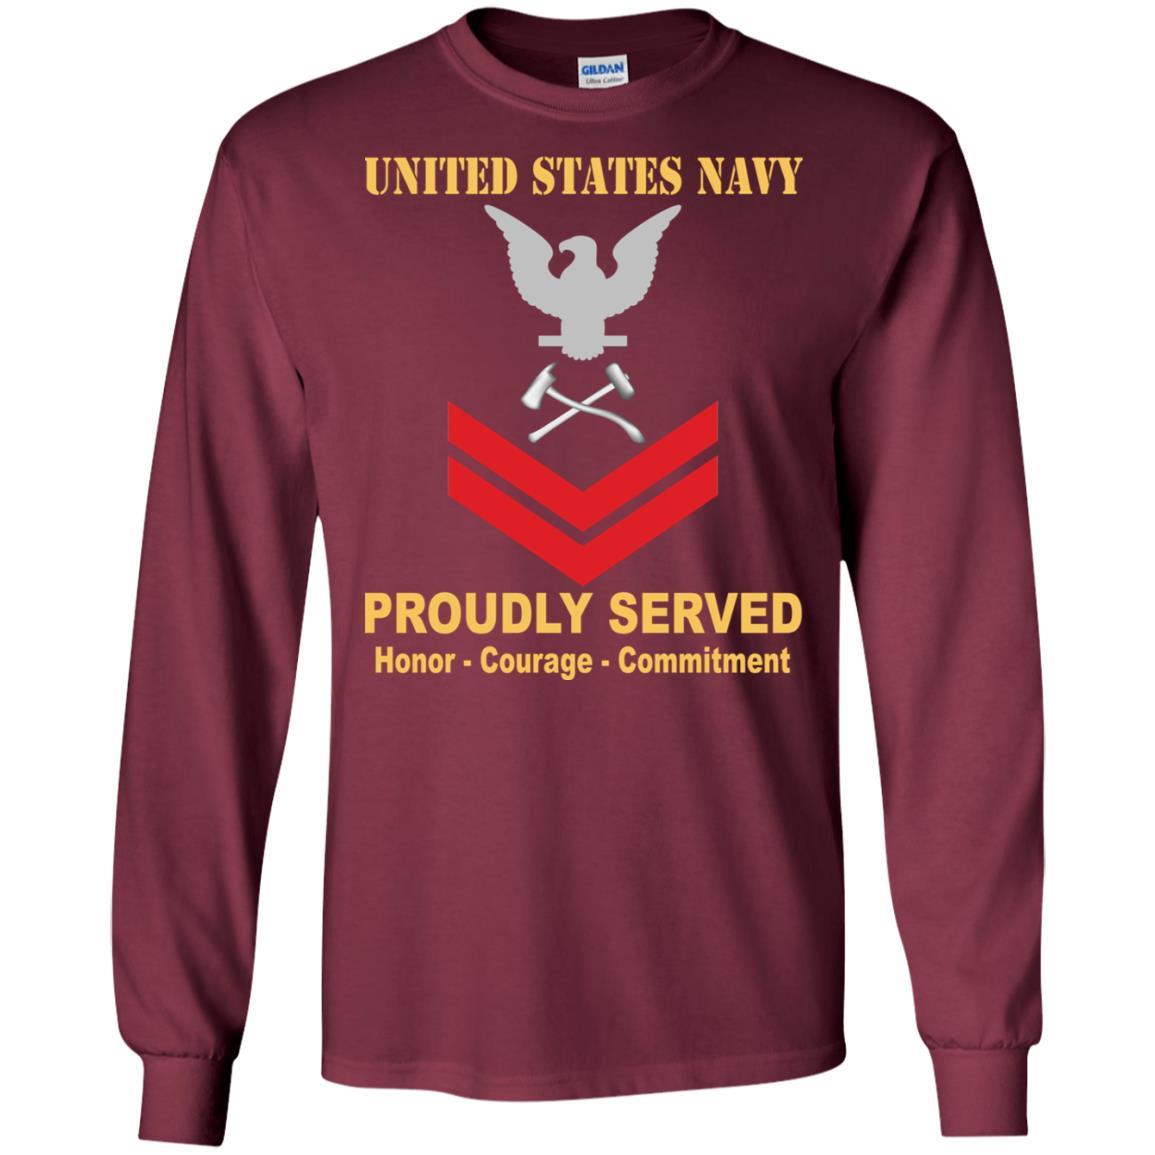 Navy Damage Controlman Navy DC E-5 Rating Badges Proudly Served T-Shirt For Men On Front-TShirt-Navy-Veterans Nation